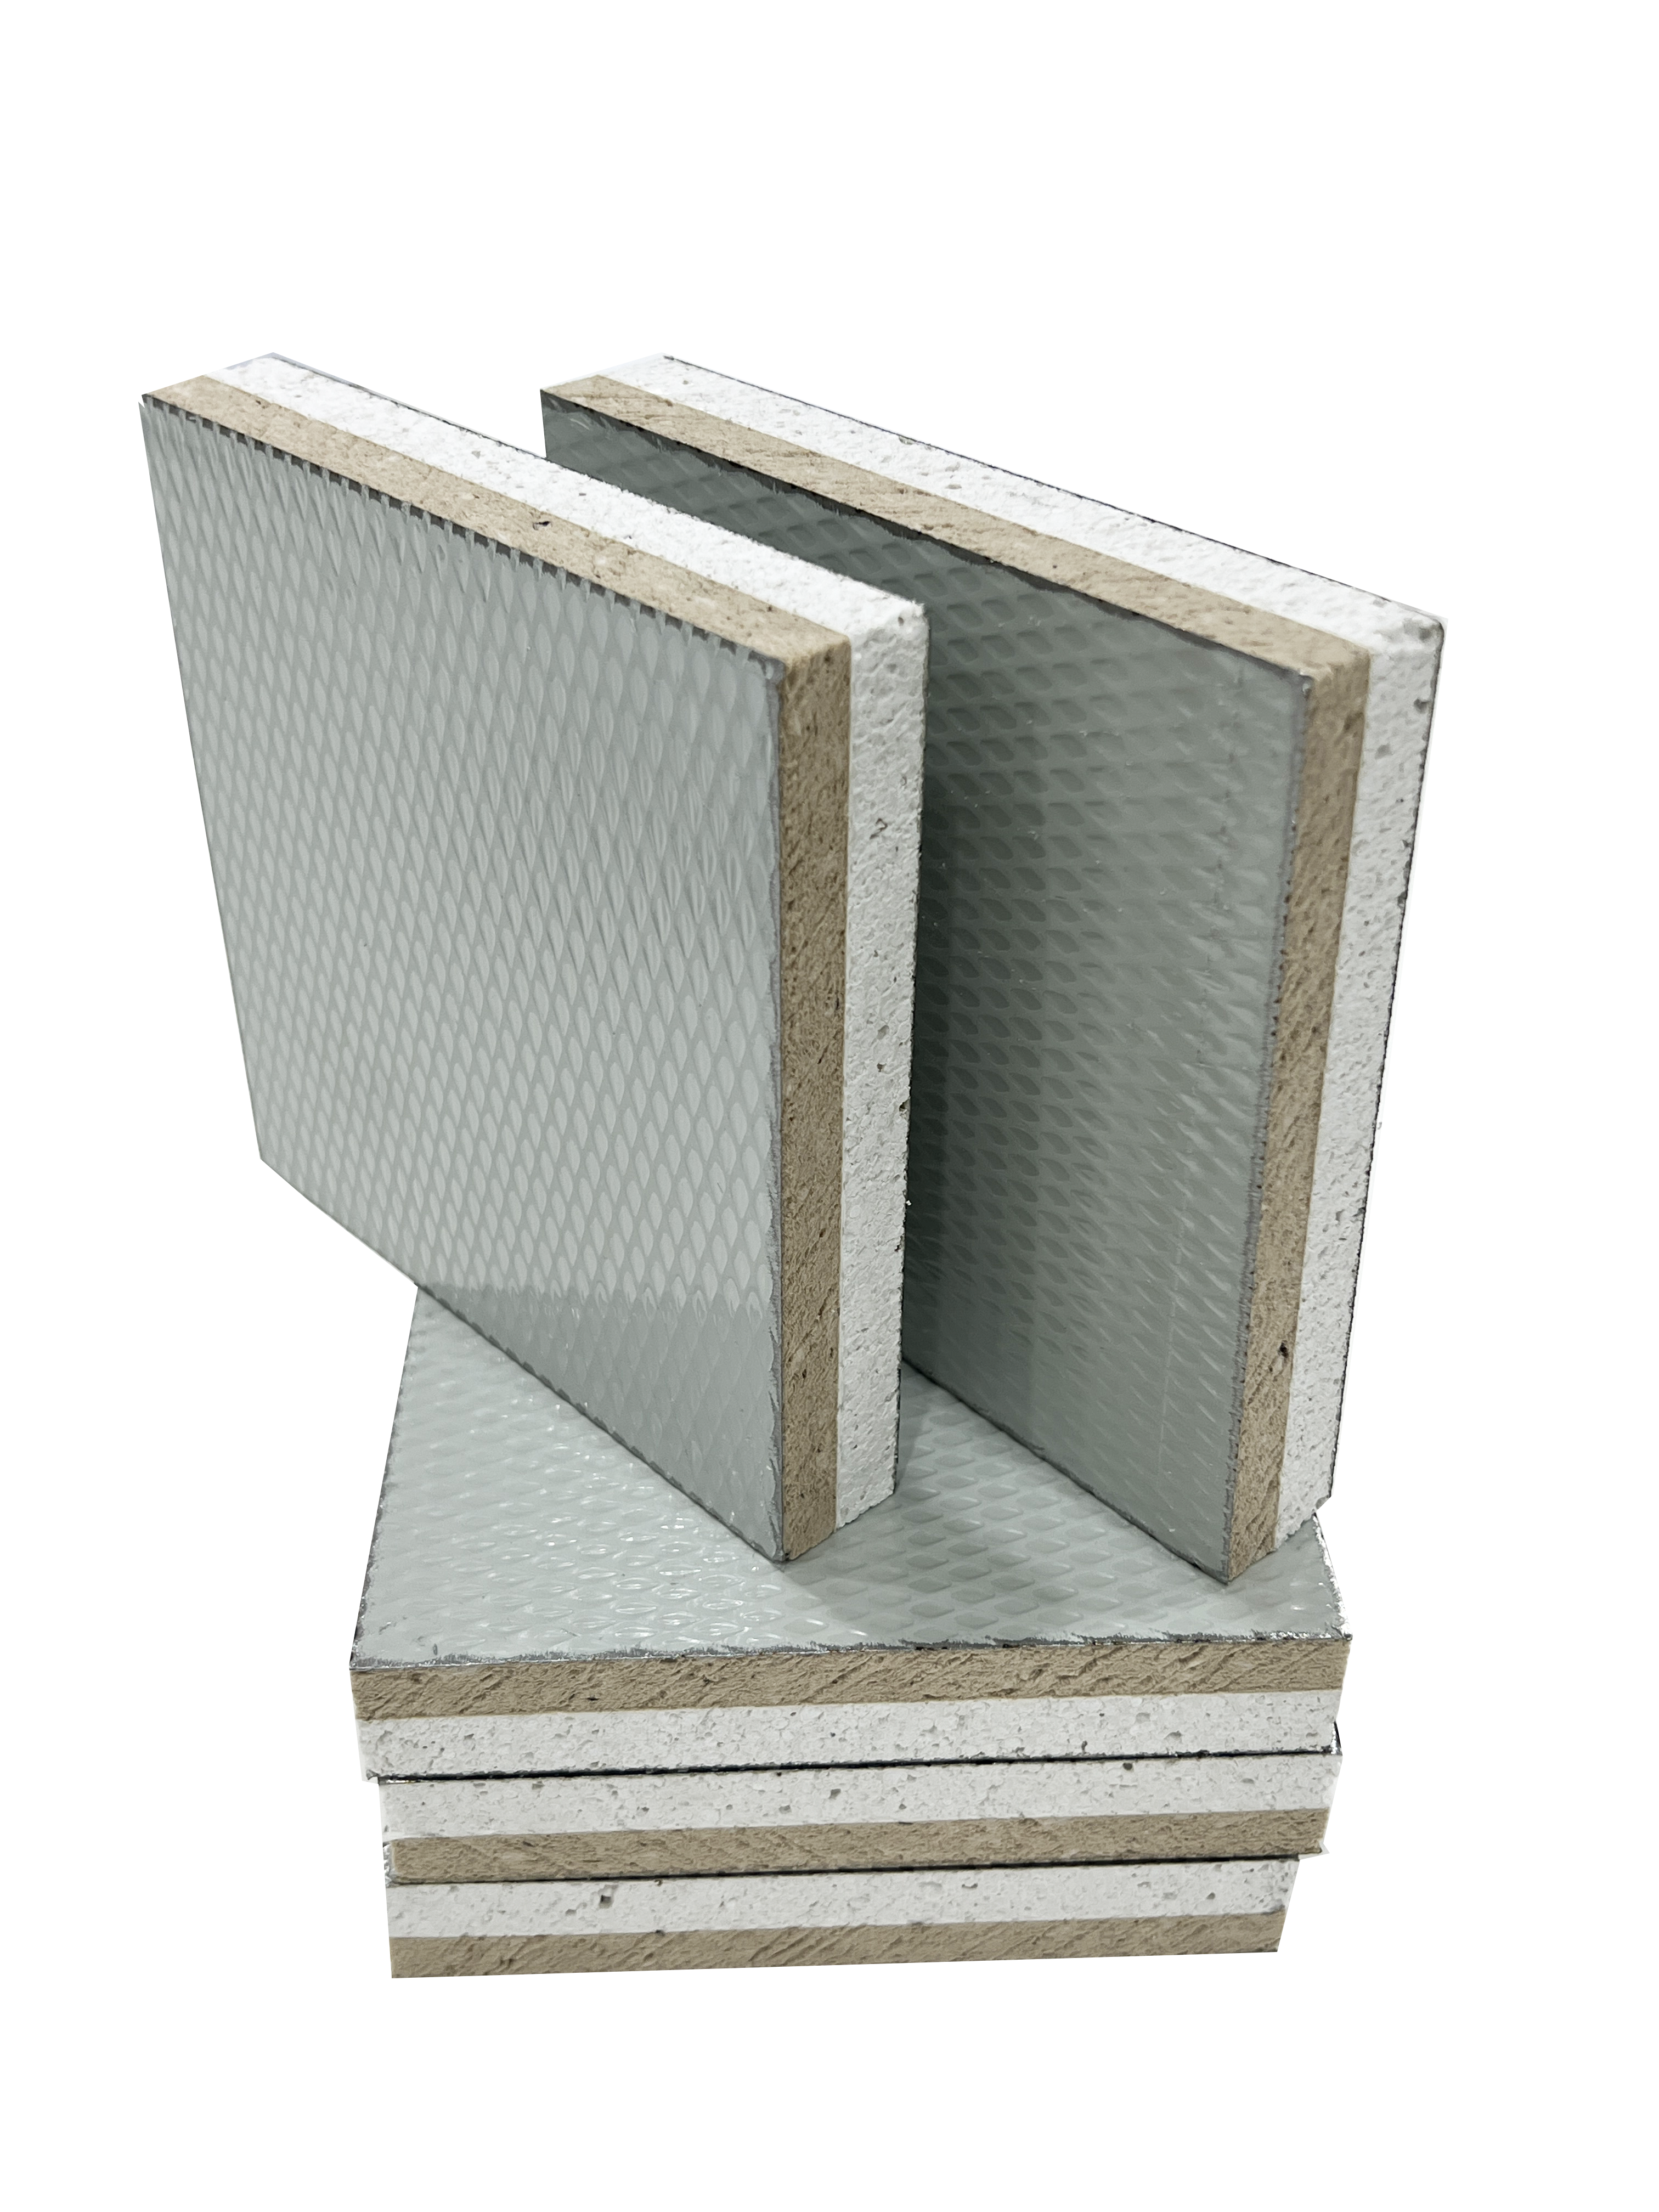 Common Types of Insulation Boards